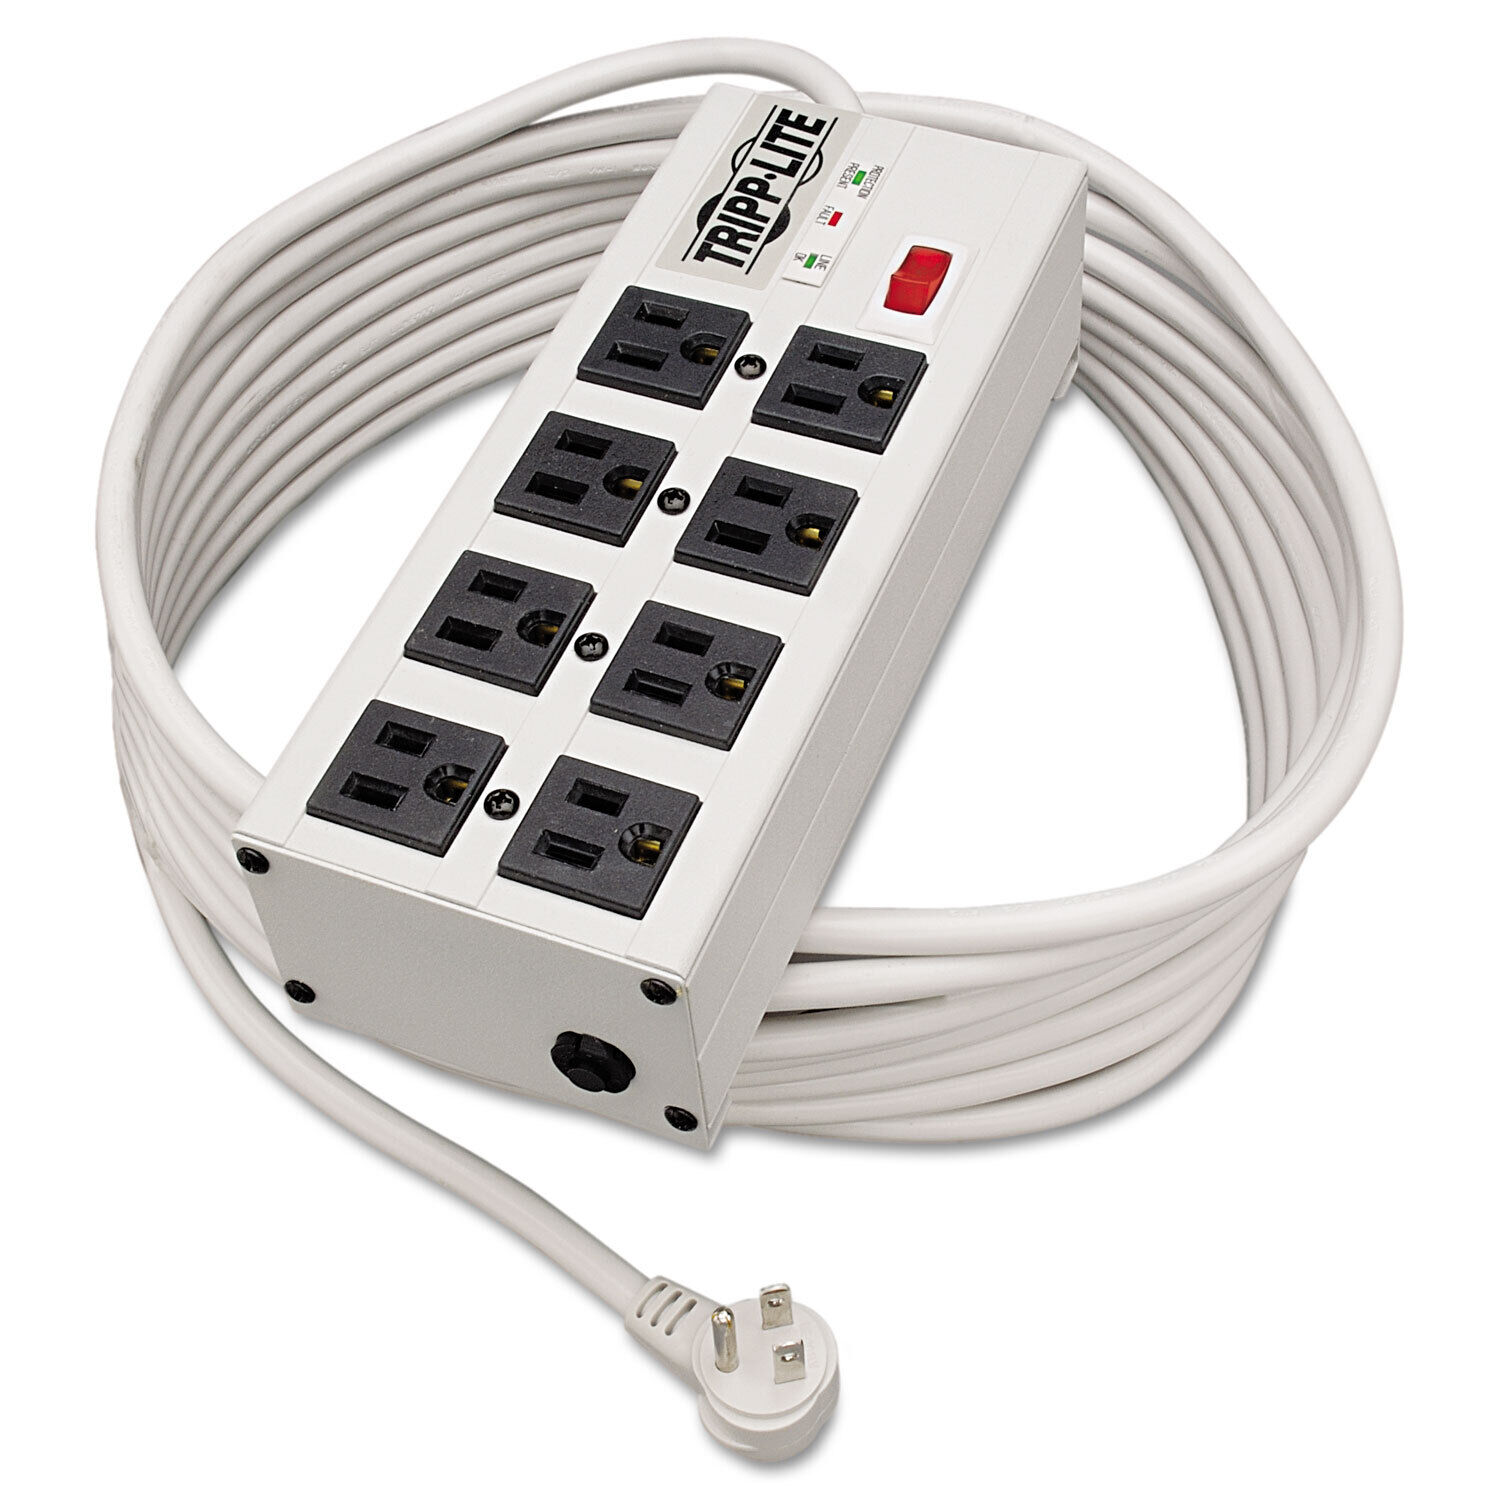 Tripp Lite Isobar Metal Surge Suppressor 8 Outlets 25 ft Cord 3840 Joules Light